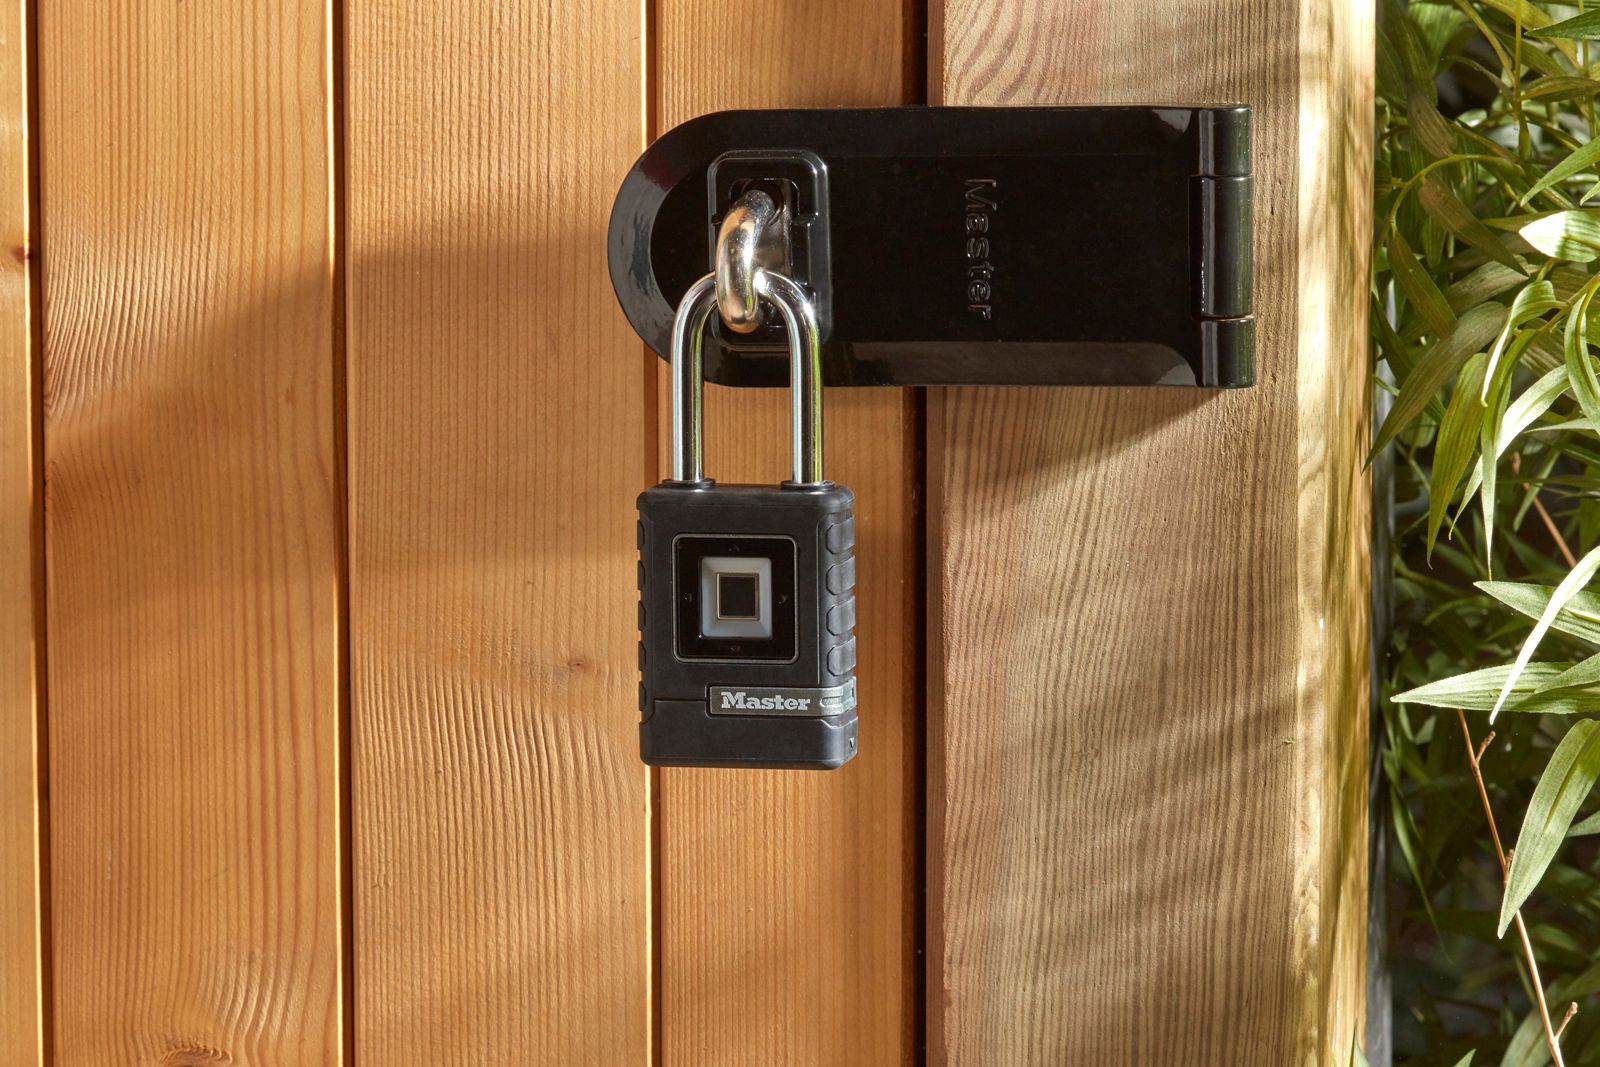 Now You Can Unlock Your Shed With A Fingerprint Using Master Locks Outdoor Biometric Padlock image 1